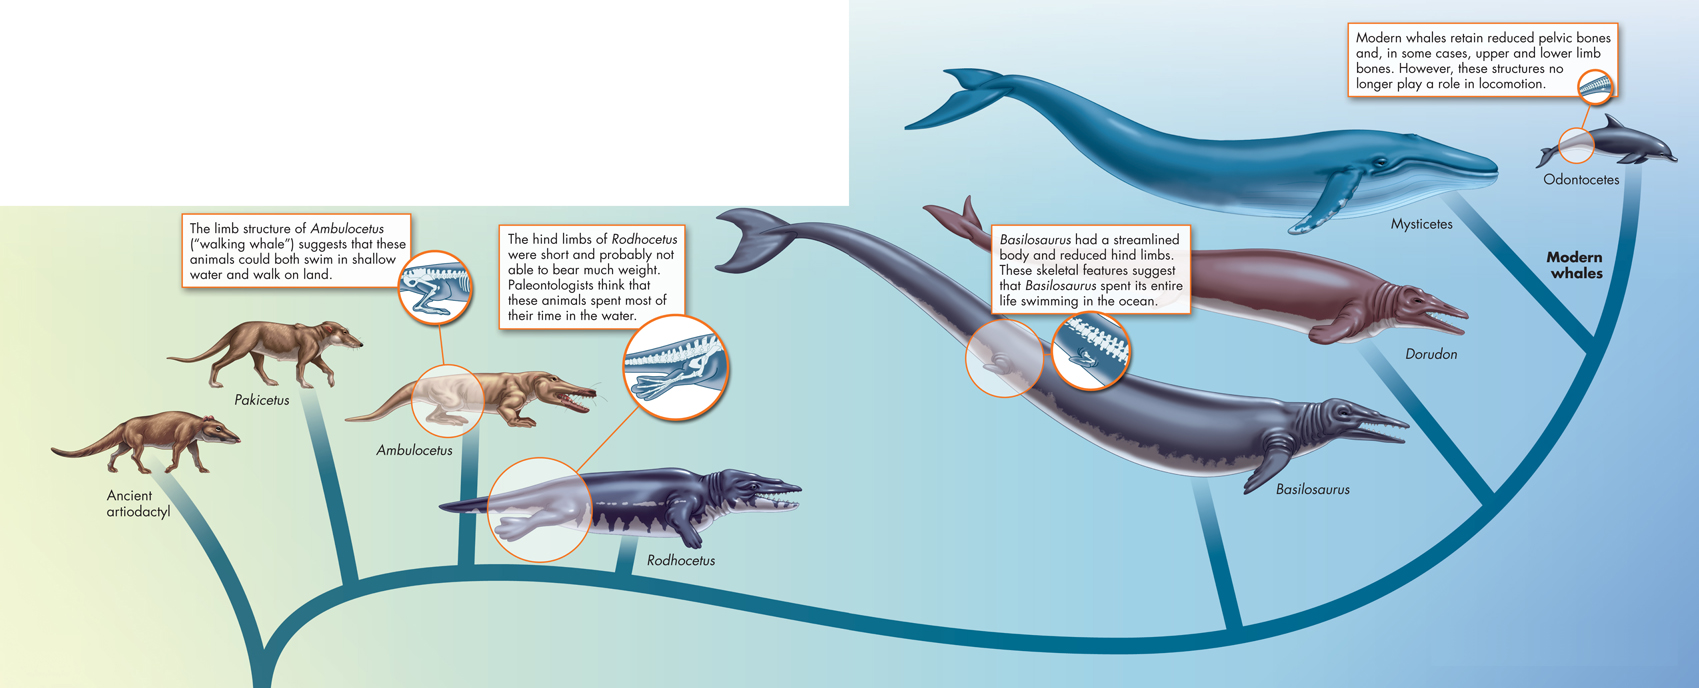 An illustration depicting the evolution of whales from ancestors that walked on land.